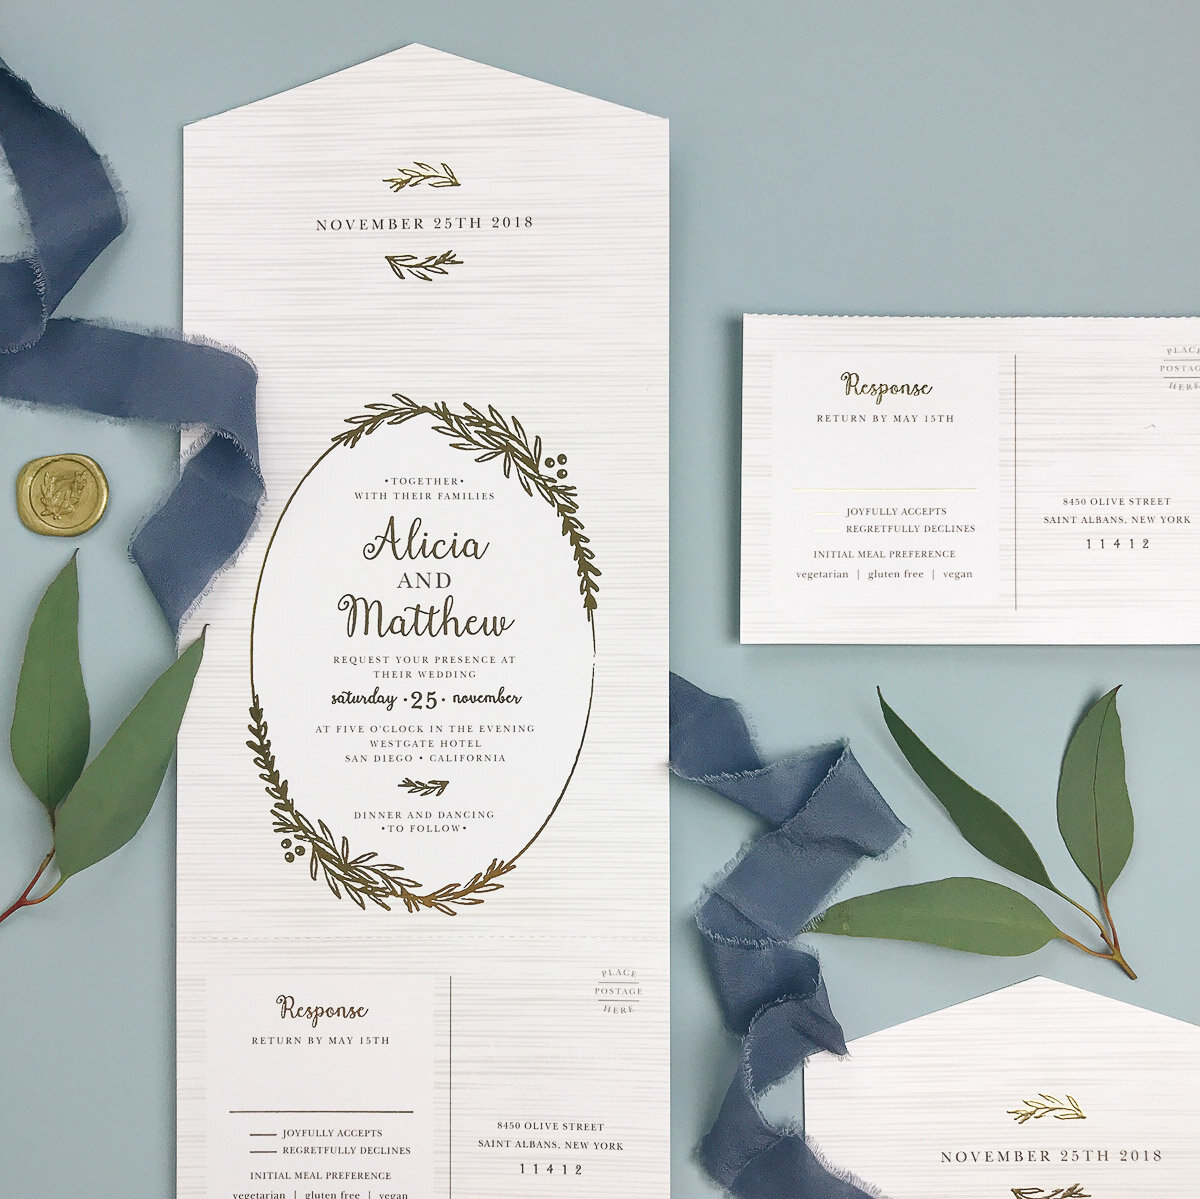 wedding invitations with flowers